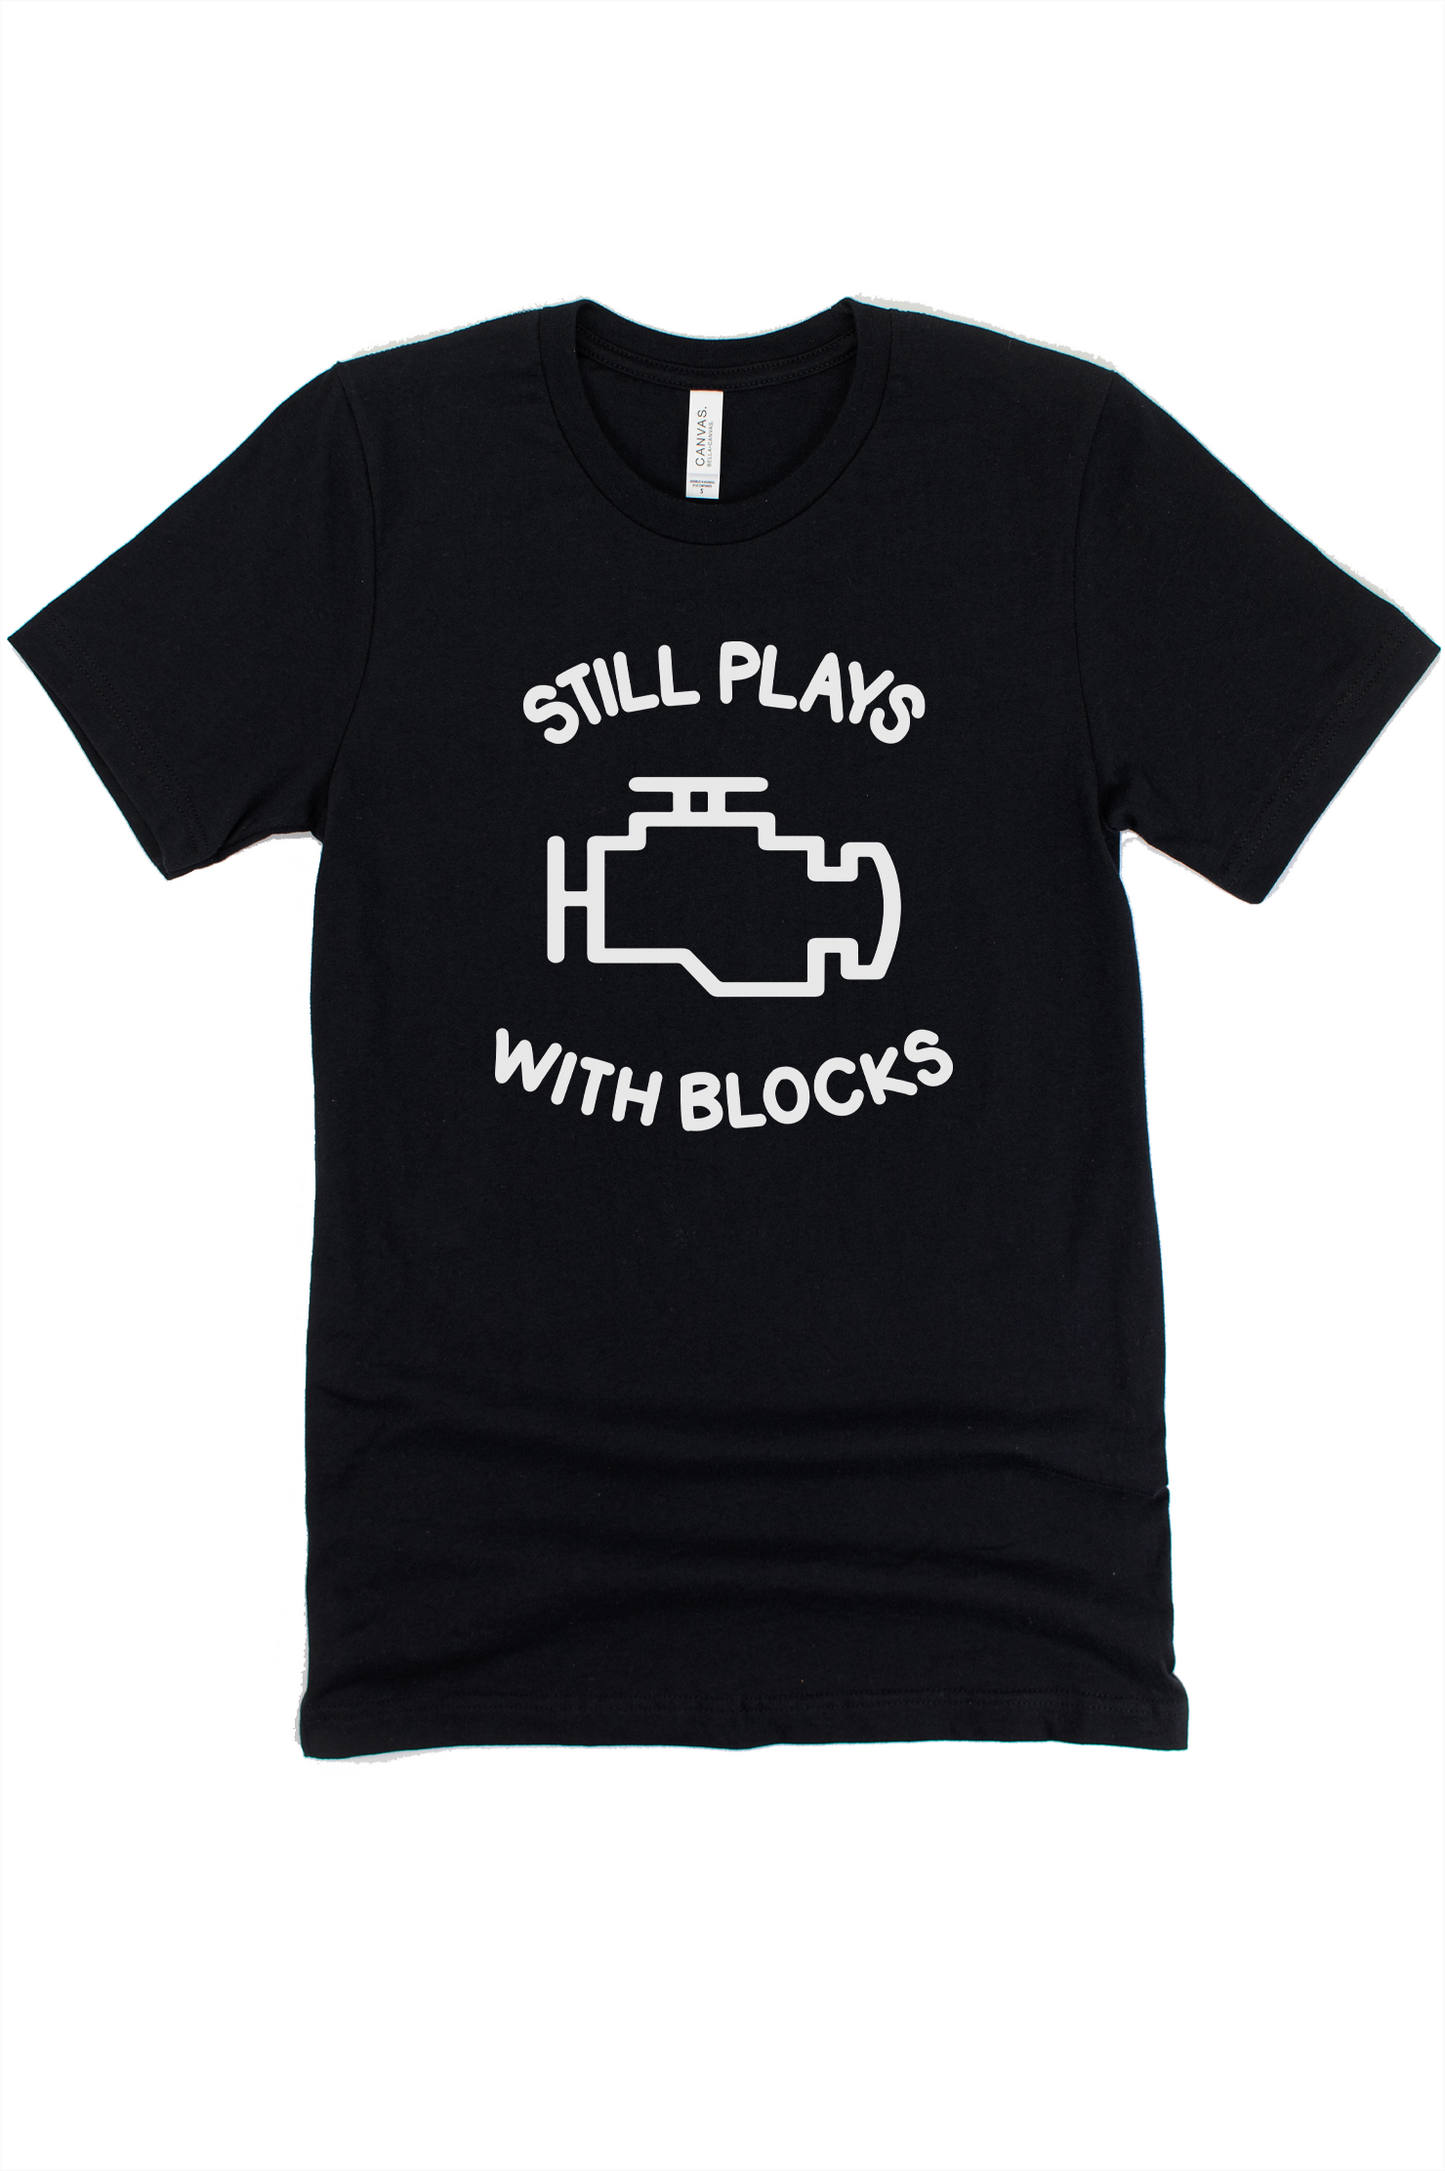 Still Plays With Blocks Graphic Tee